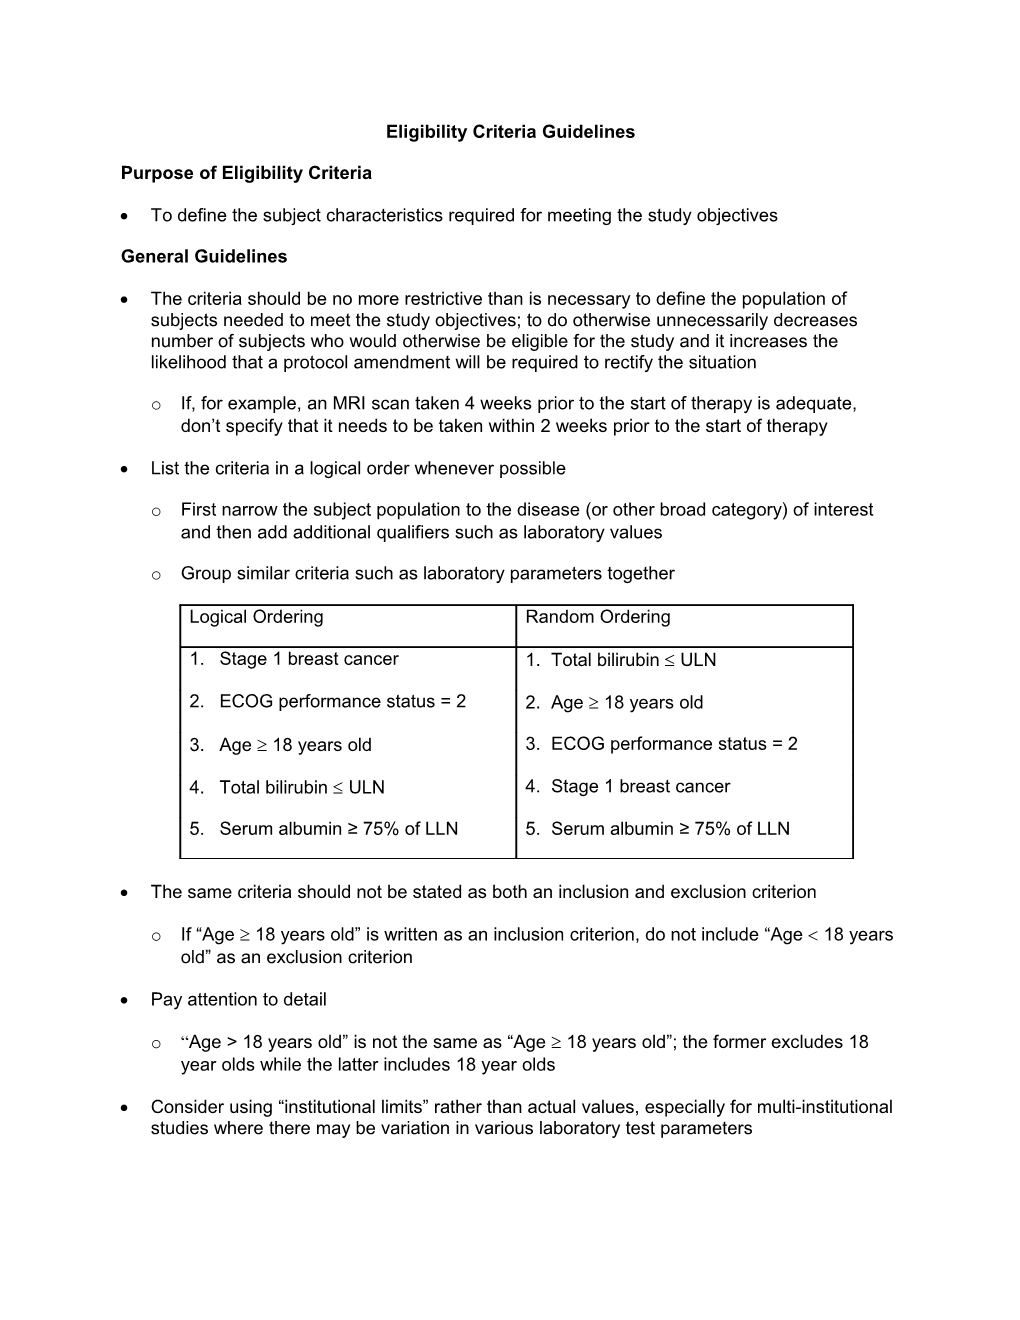 Writing Well-Defined Eligibility and Exclusion Criteria